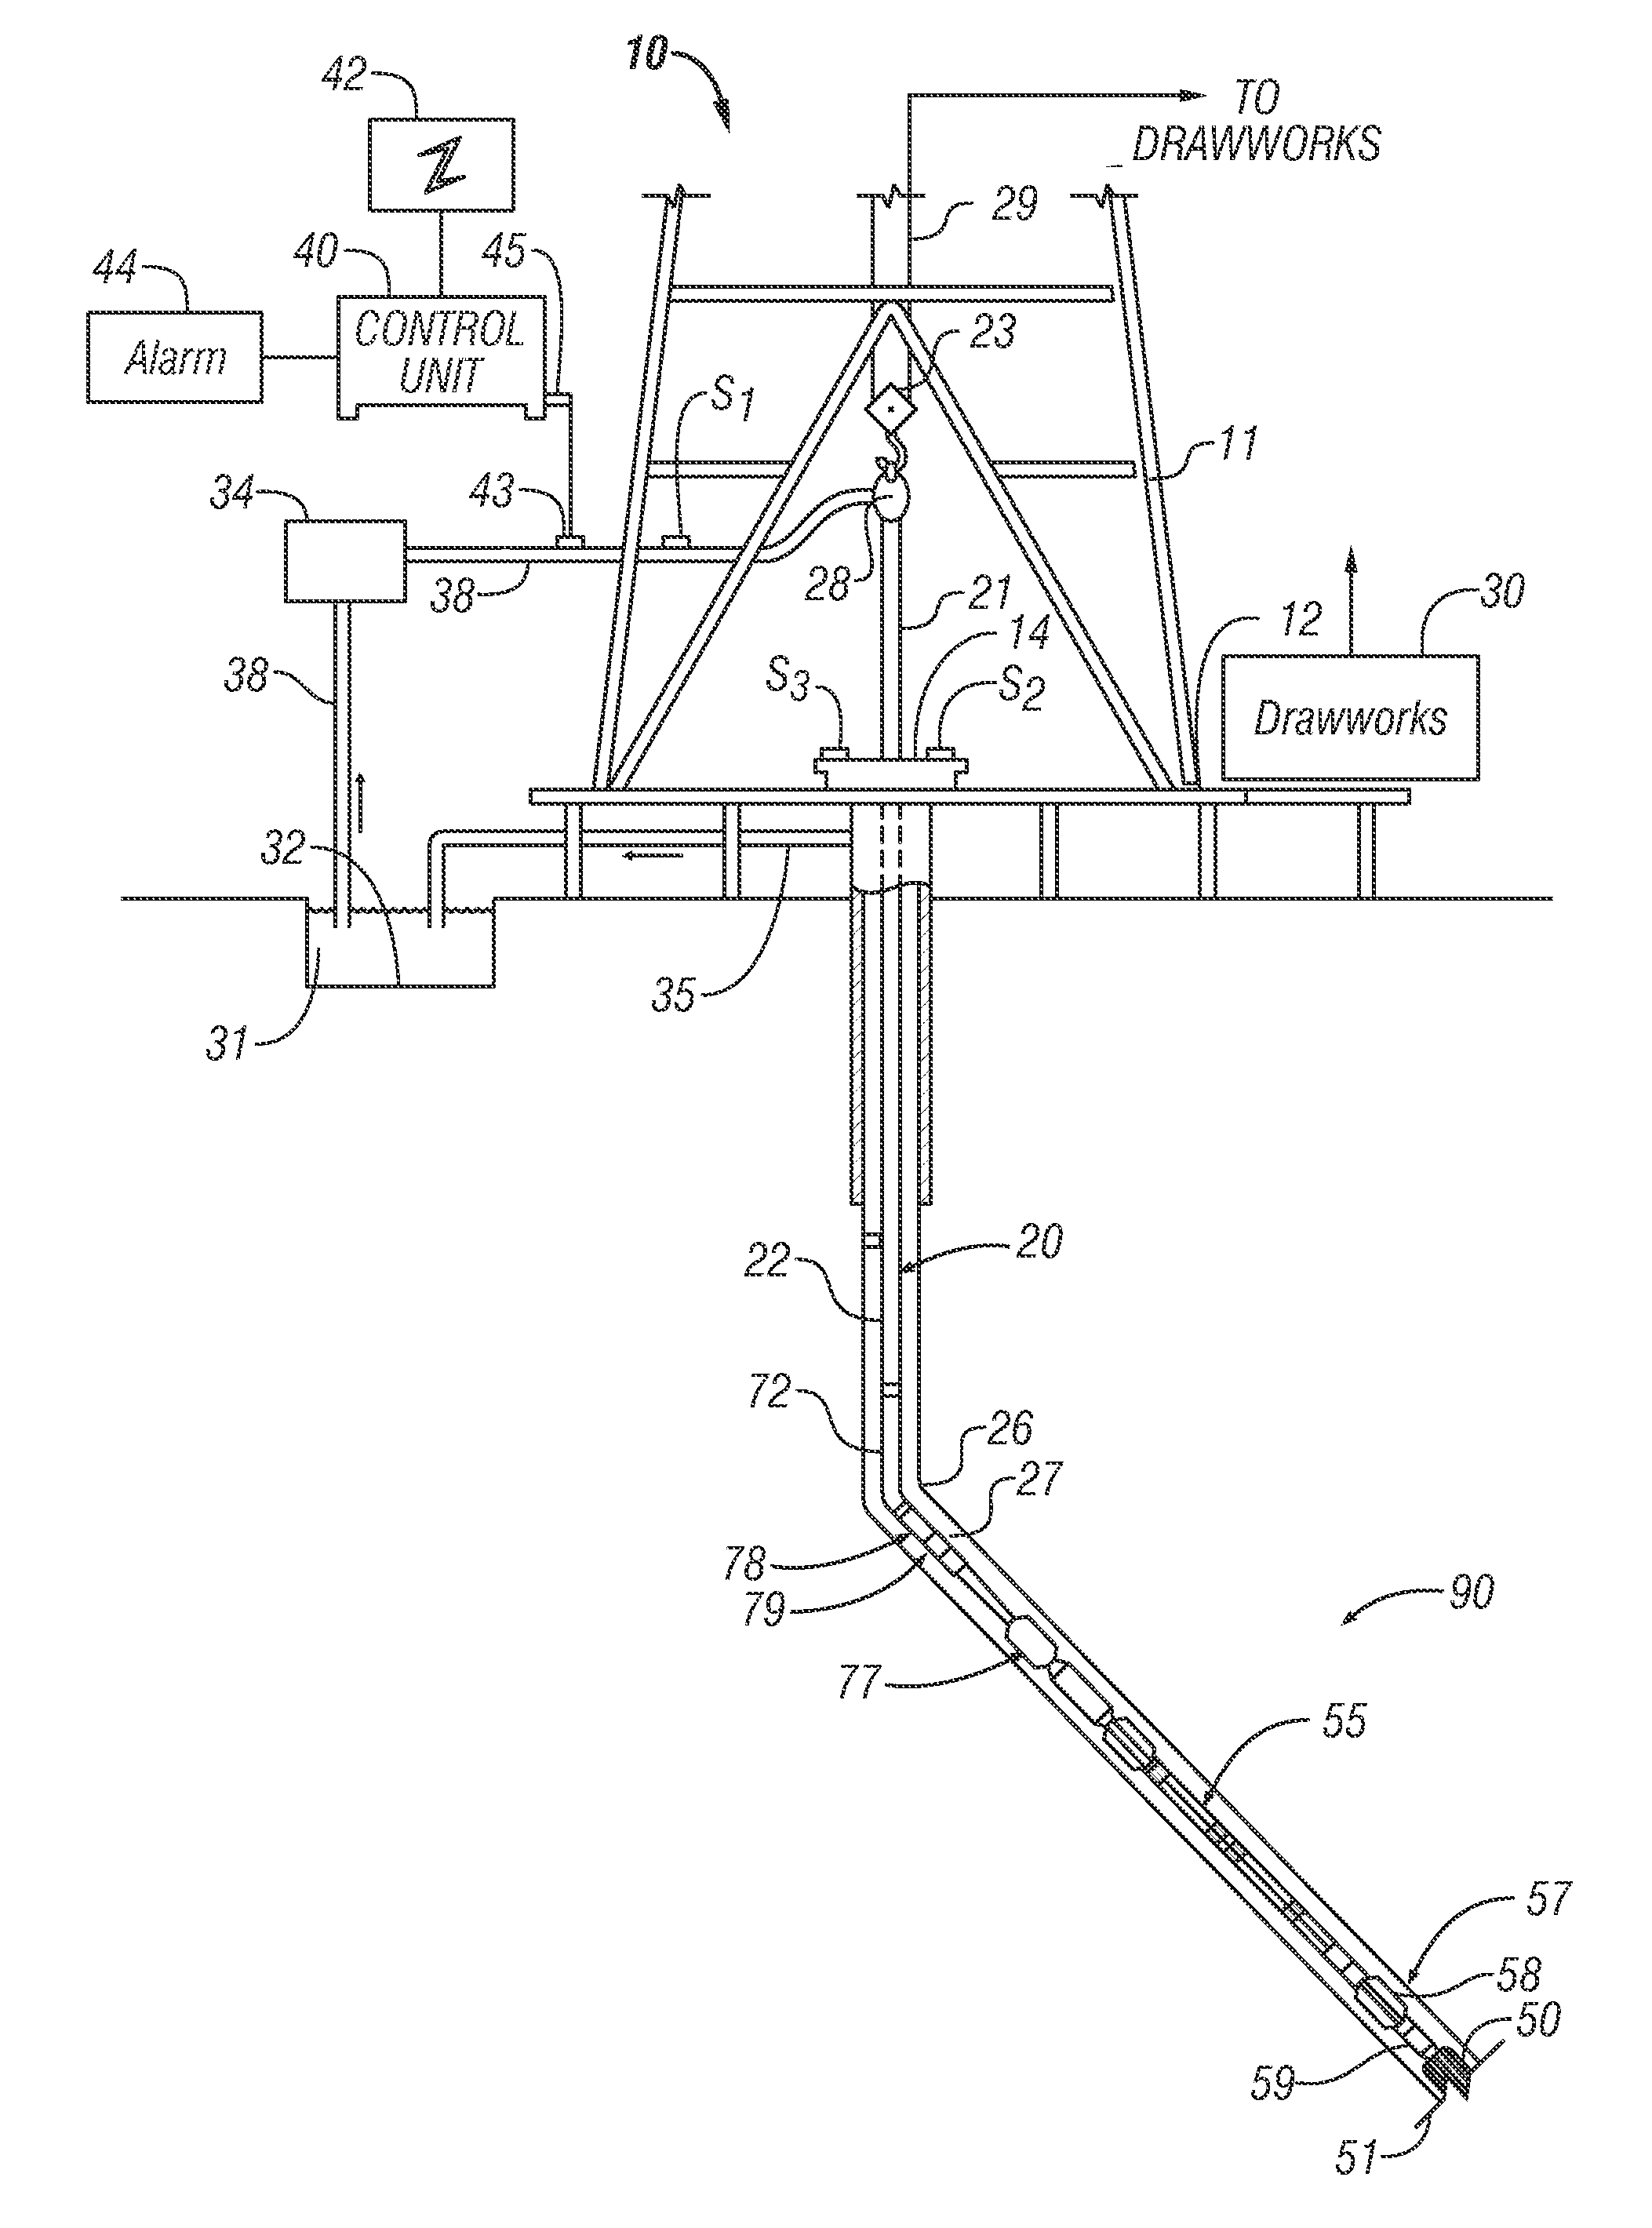 Method and Apparatus for Borehole Positioning